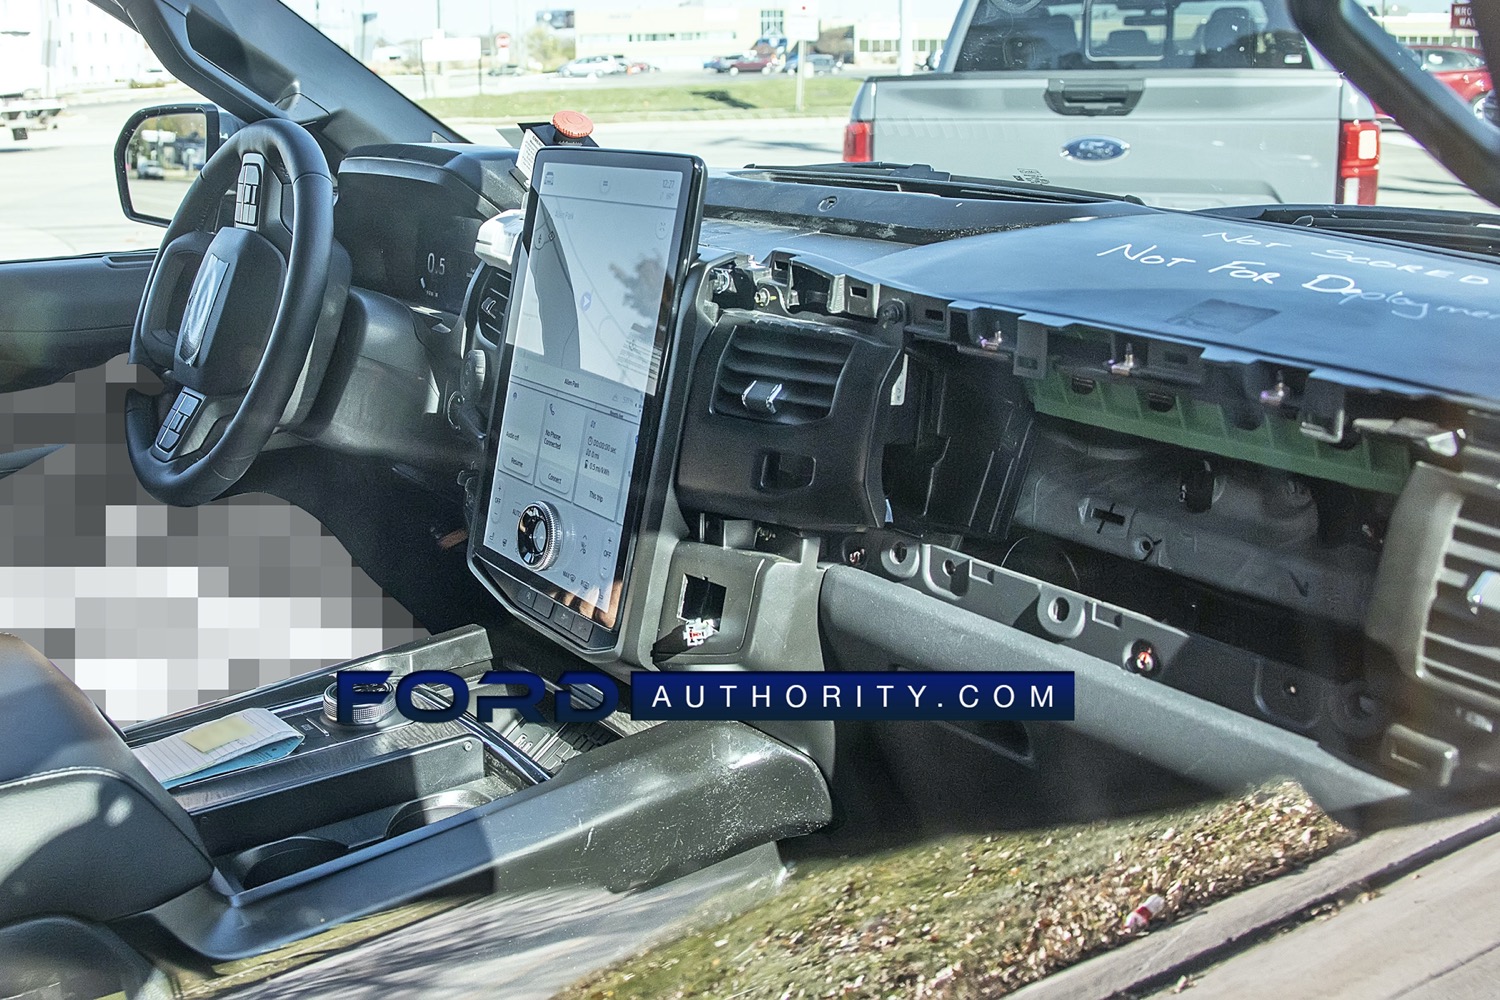 Ford Mondeo 2022 Interior 2022 Ford Maverick Leaked In New Assembly Line Photo Your Design To Get 2022 Nonetheless Implies A 5th Time Wedding Dresses